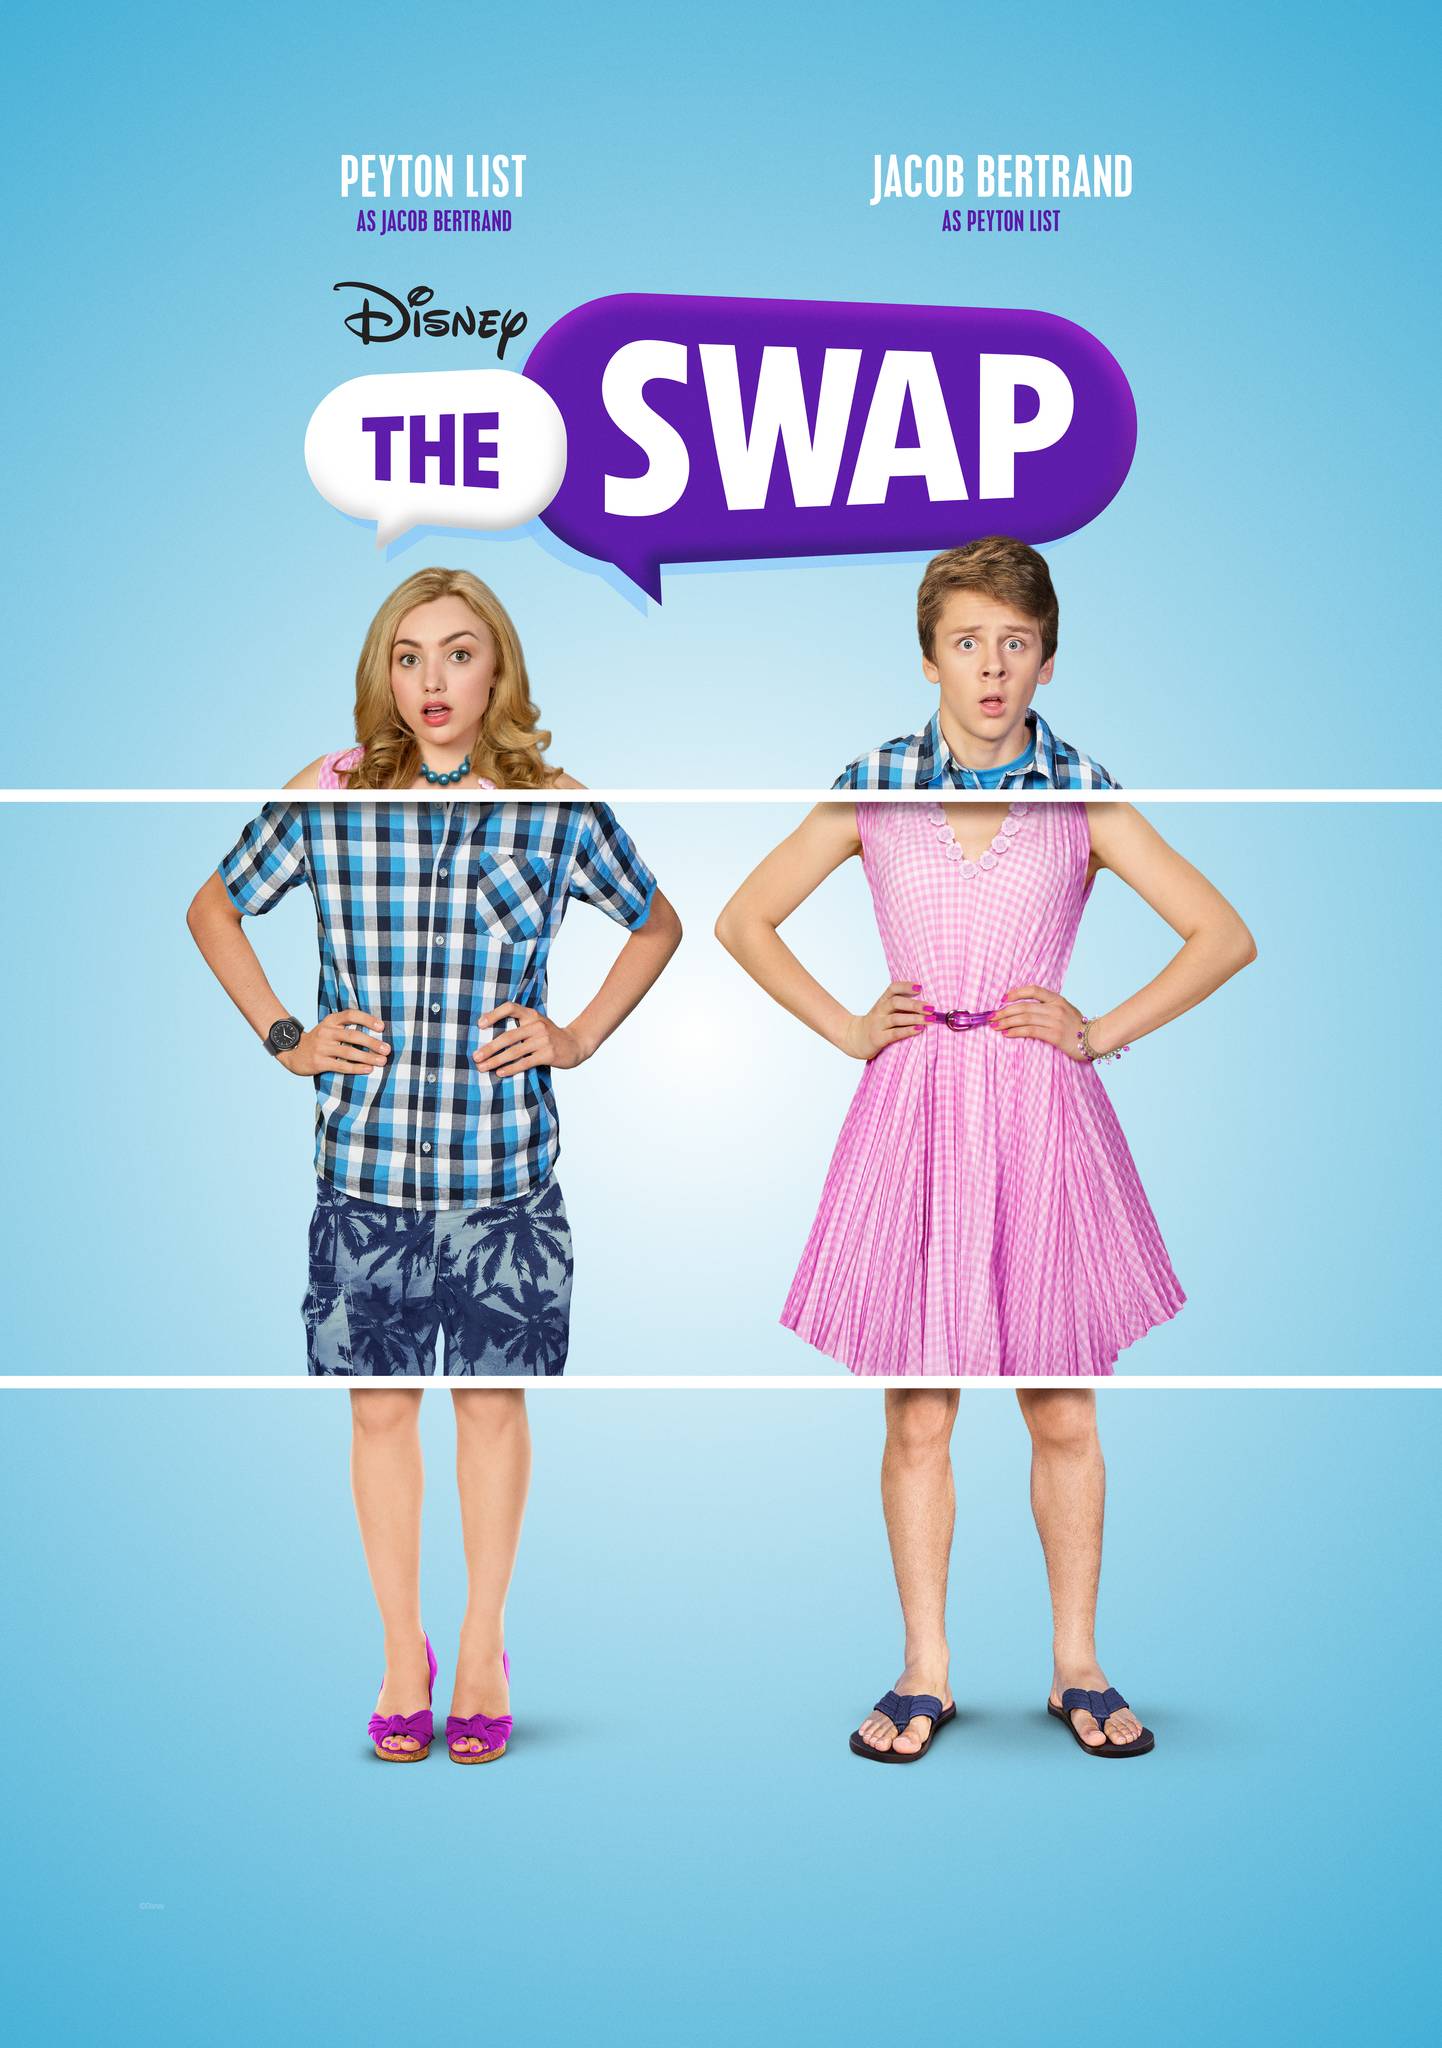 Peyton List in The Swap